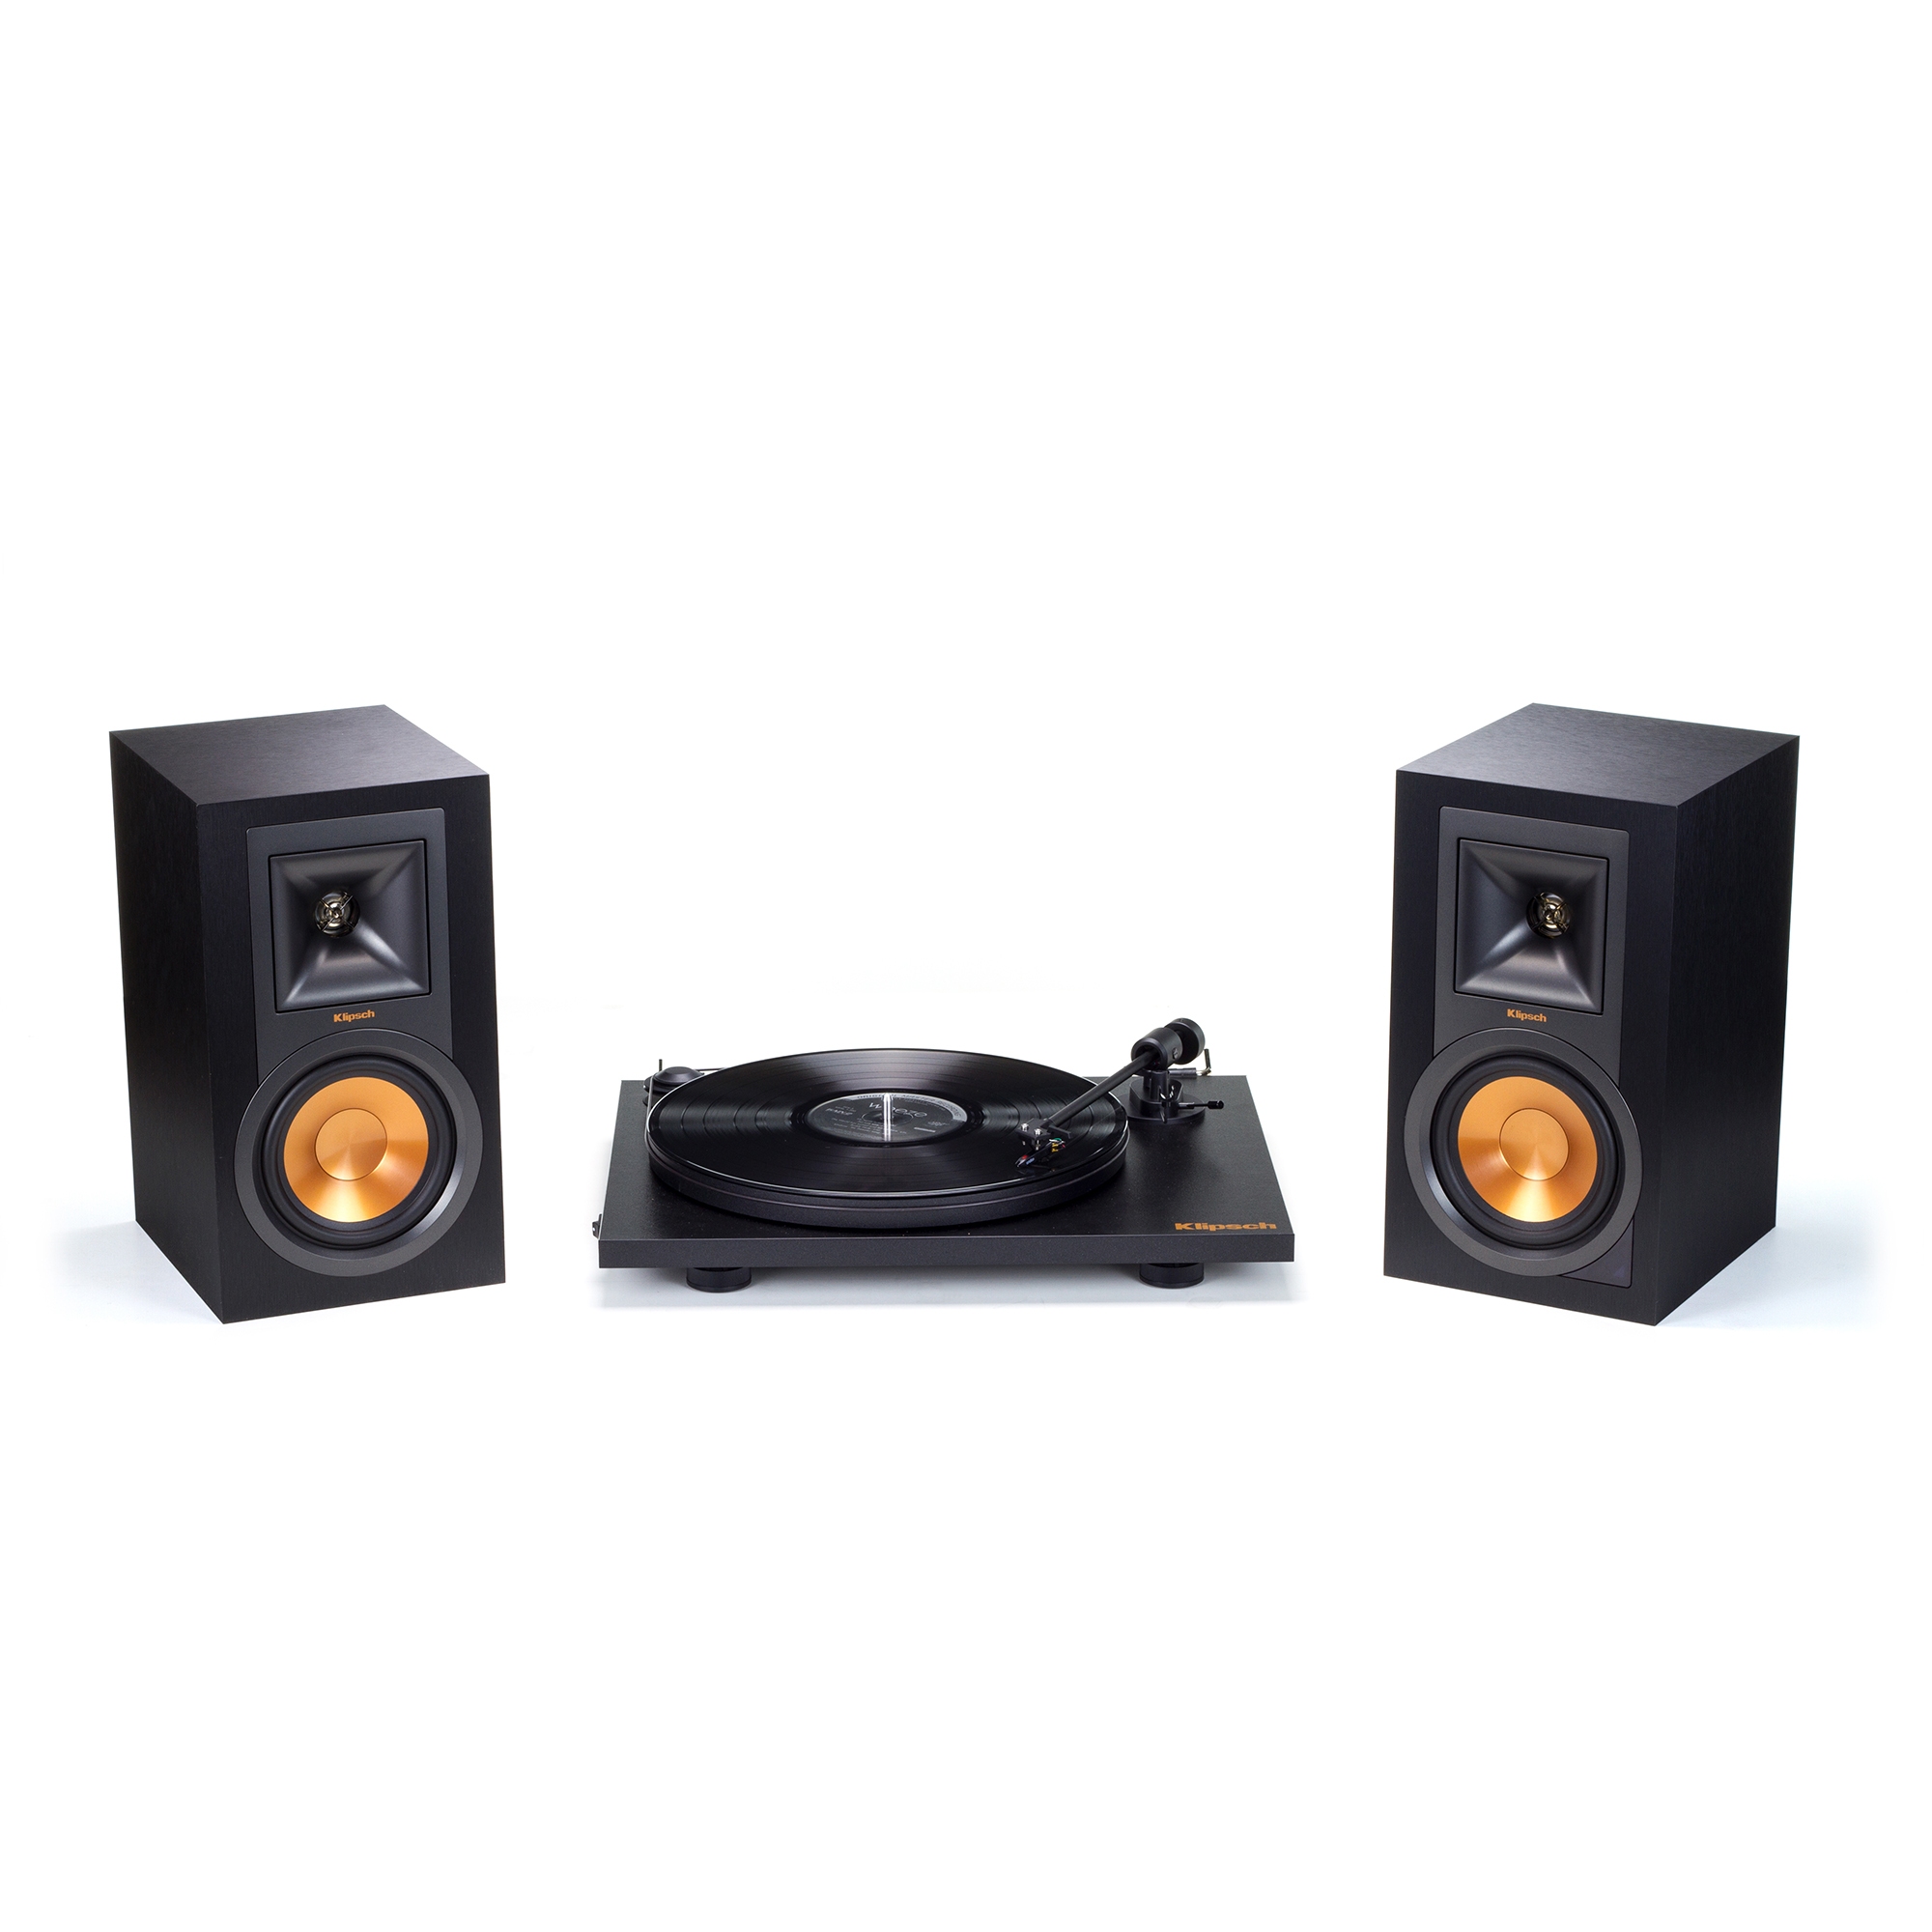 If the Klipsch speaker set only has 3.5mm jacks for connection then you.